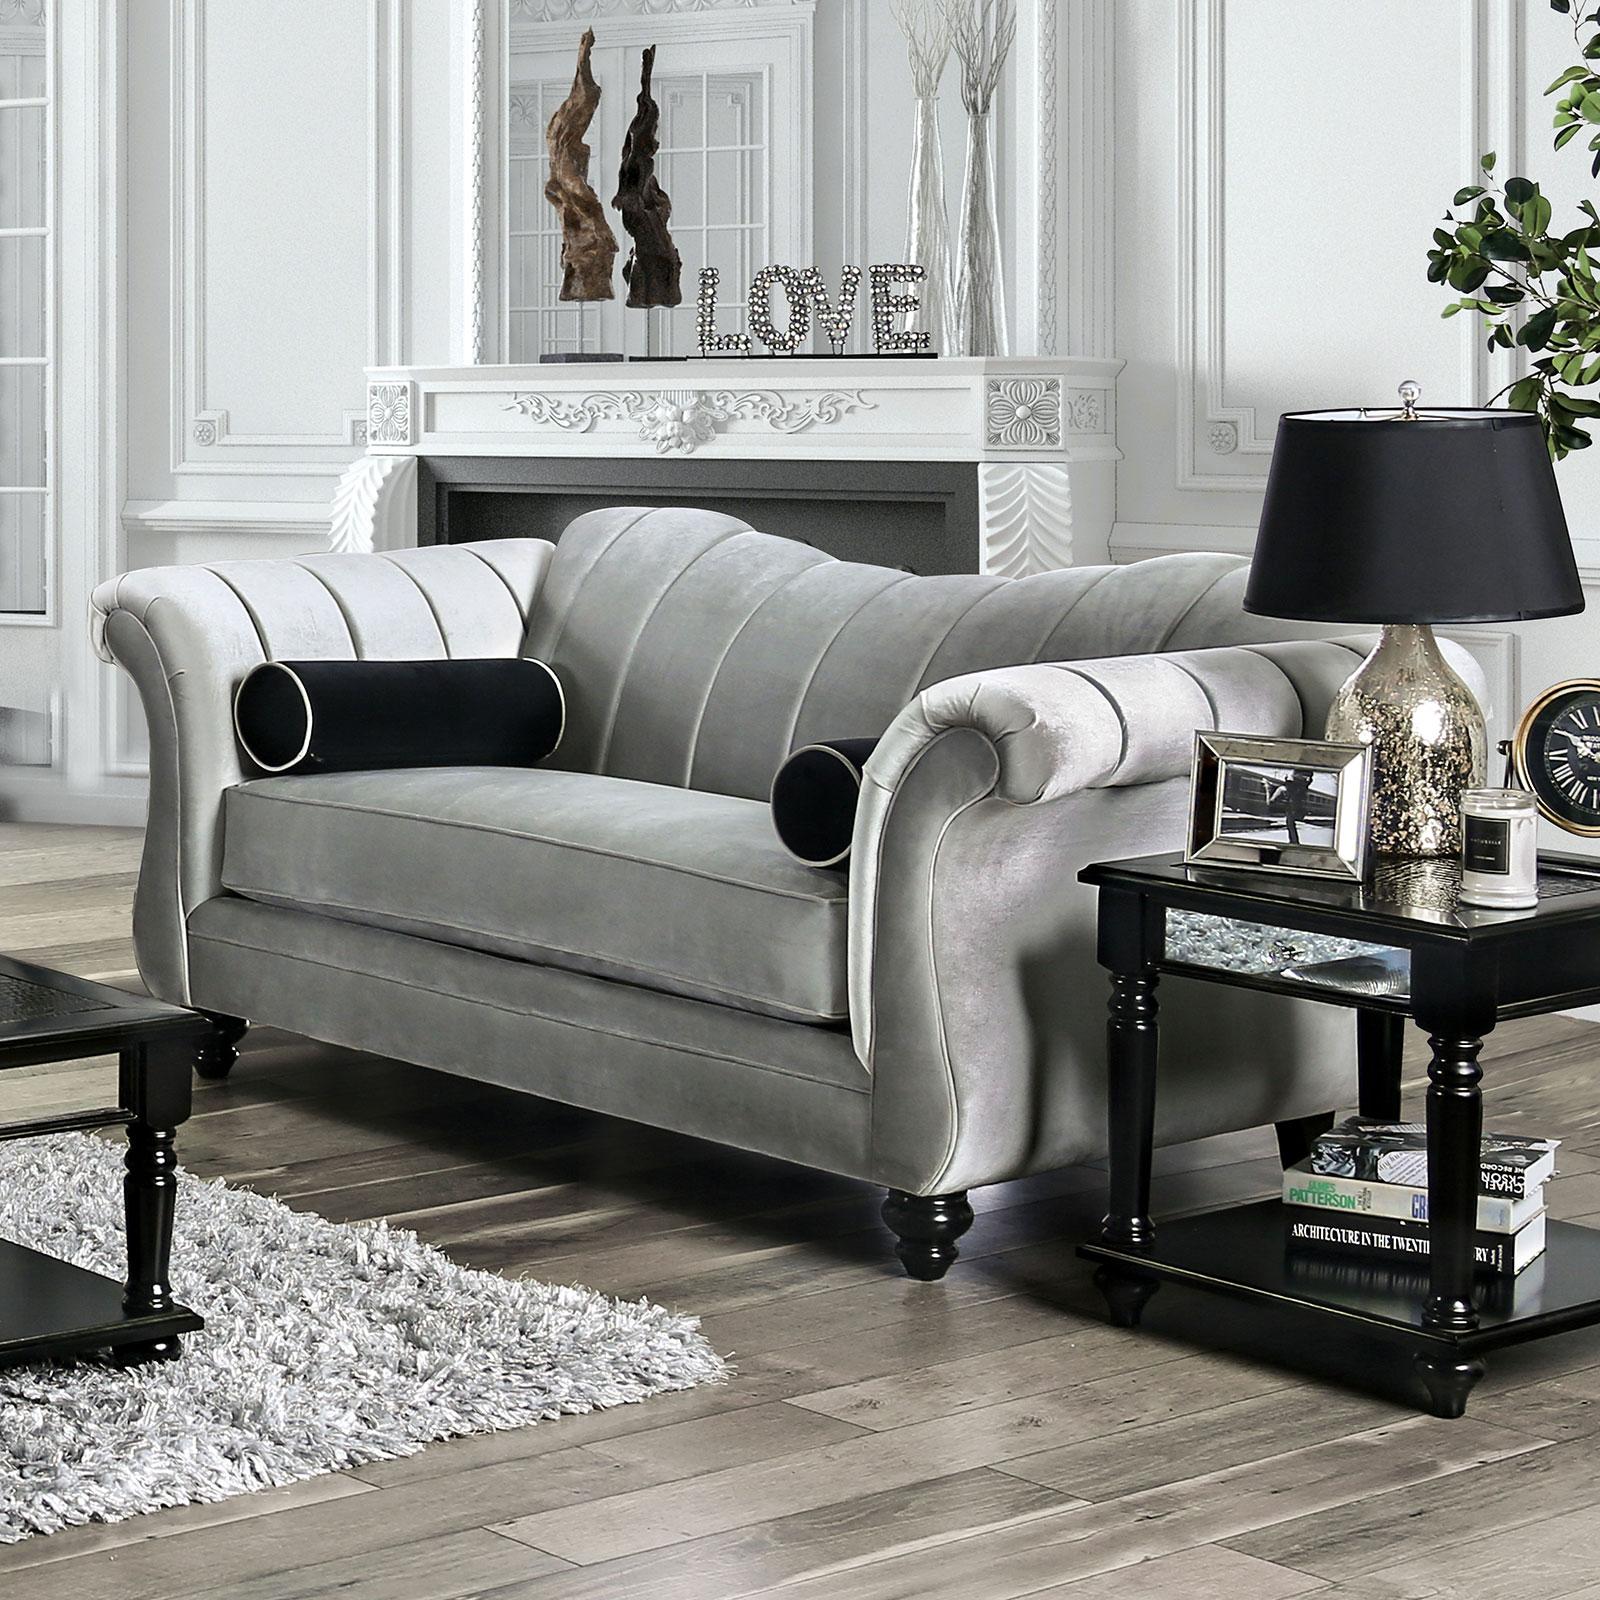 Transitional Fabric Upholstery Loveseat in Beige Marvin by Furniture of America - image 1 of 1